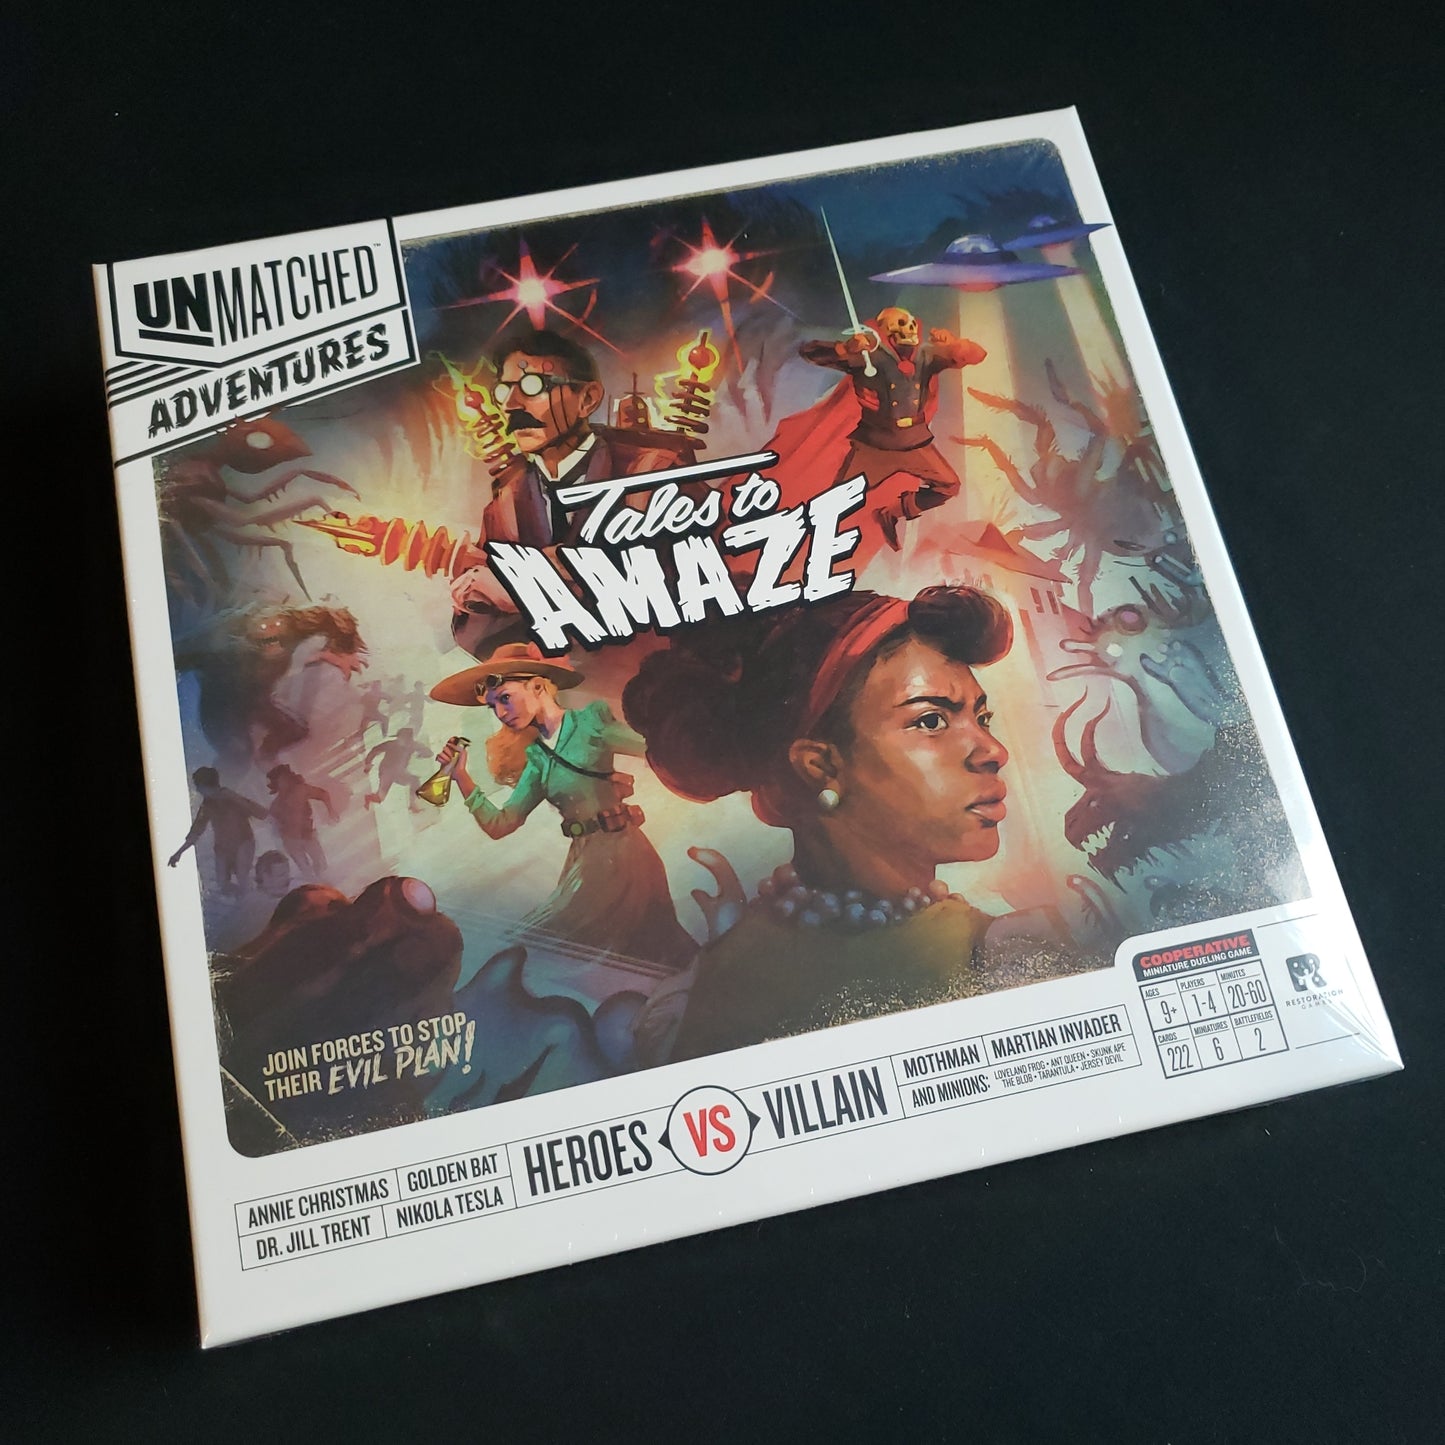 Image shows the front cover of the box of the Unmatched Adventures: Tales to Amaze board game